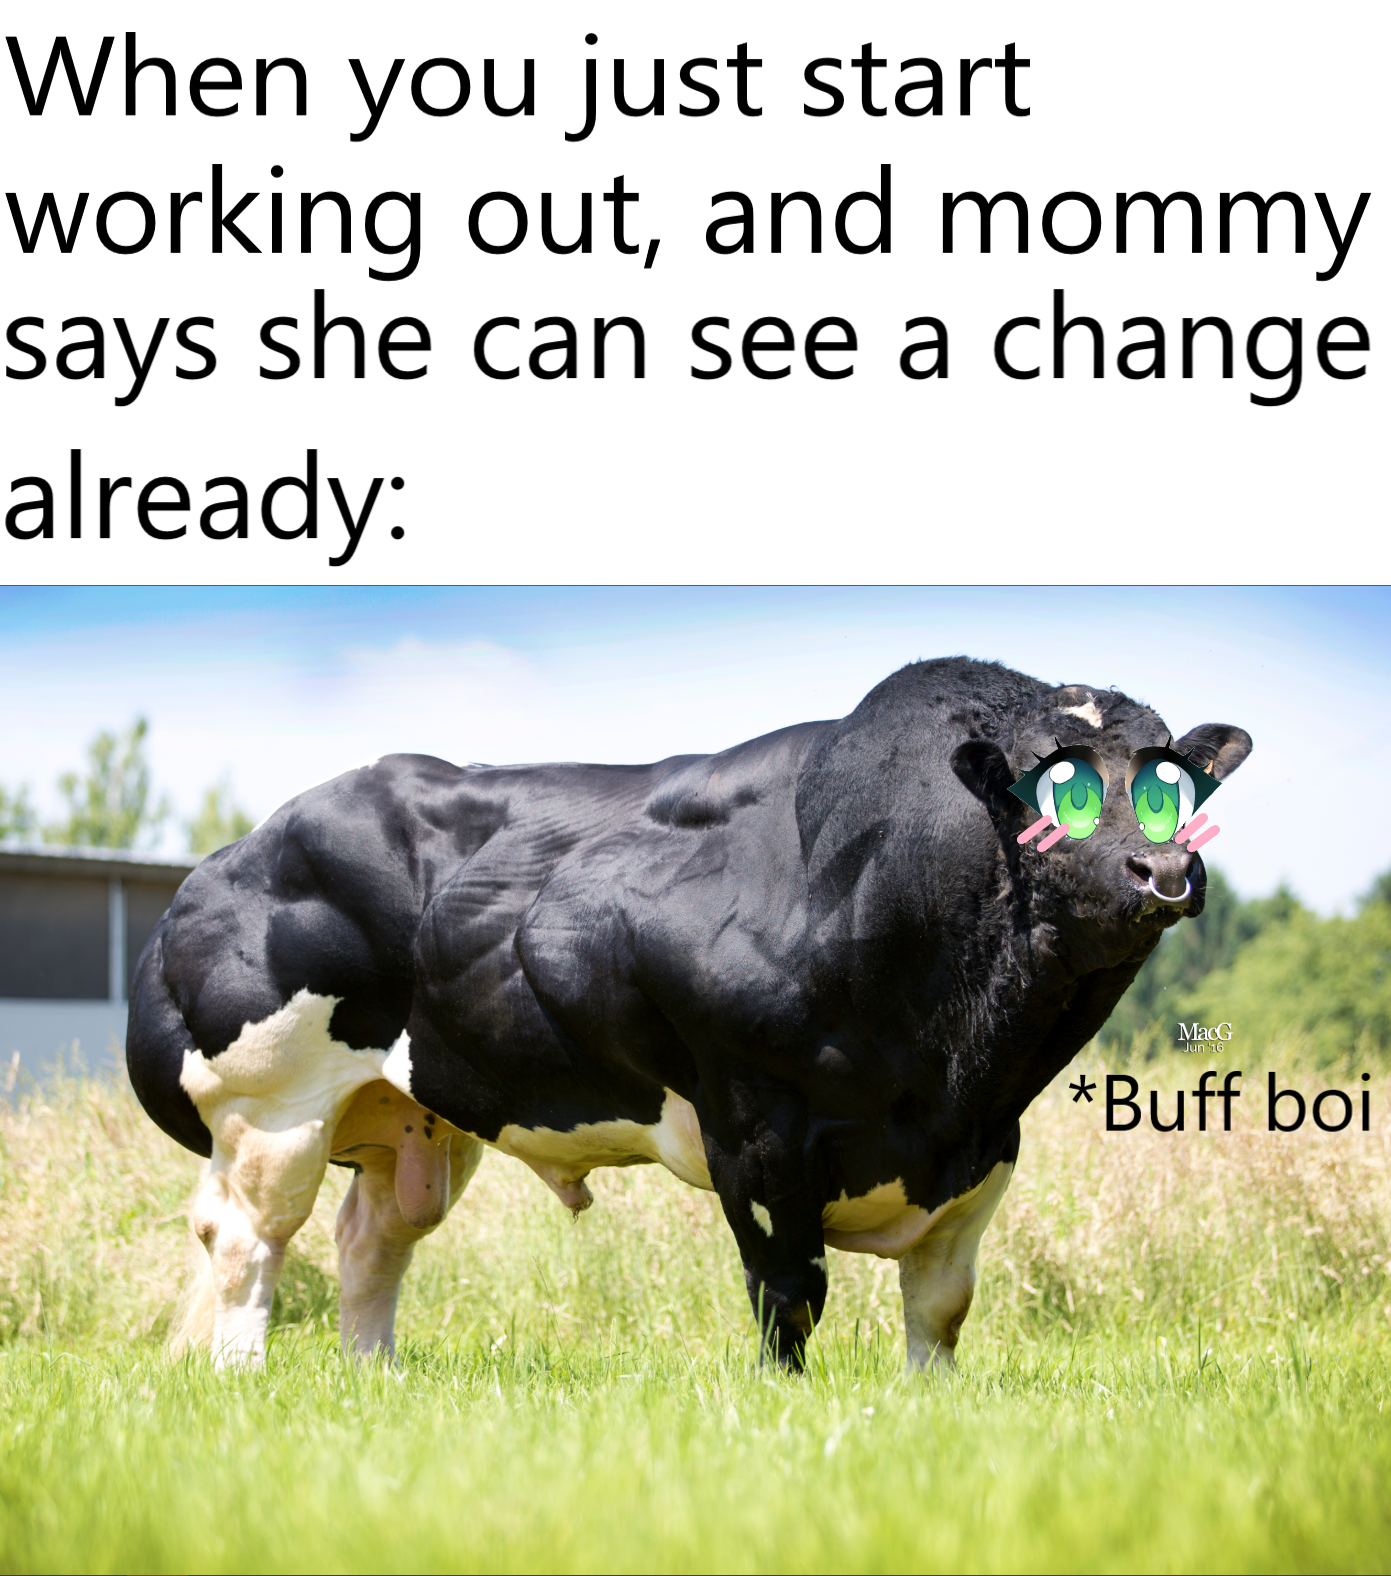 When you just start working out, and mommy says she can see a change already Mt Buff boi